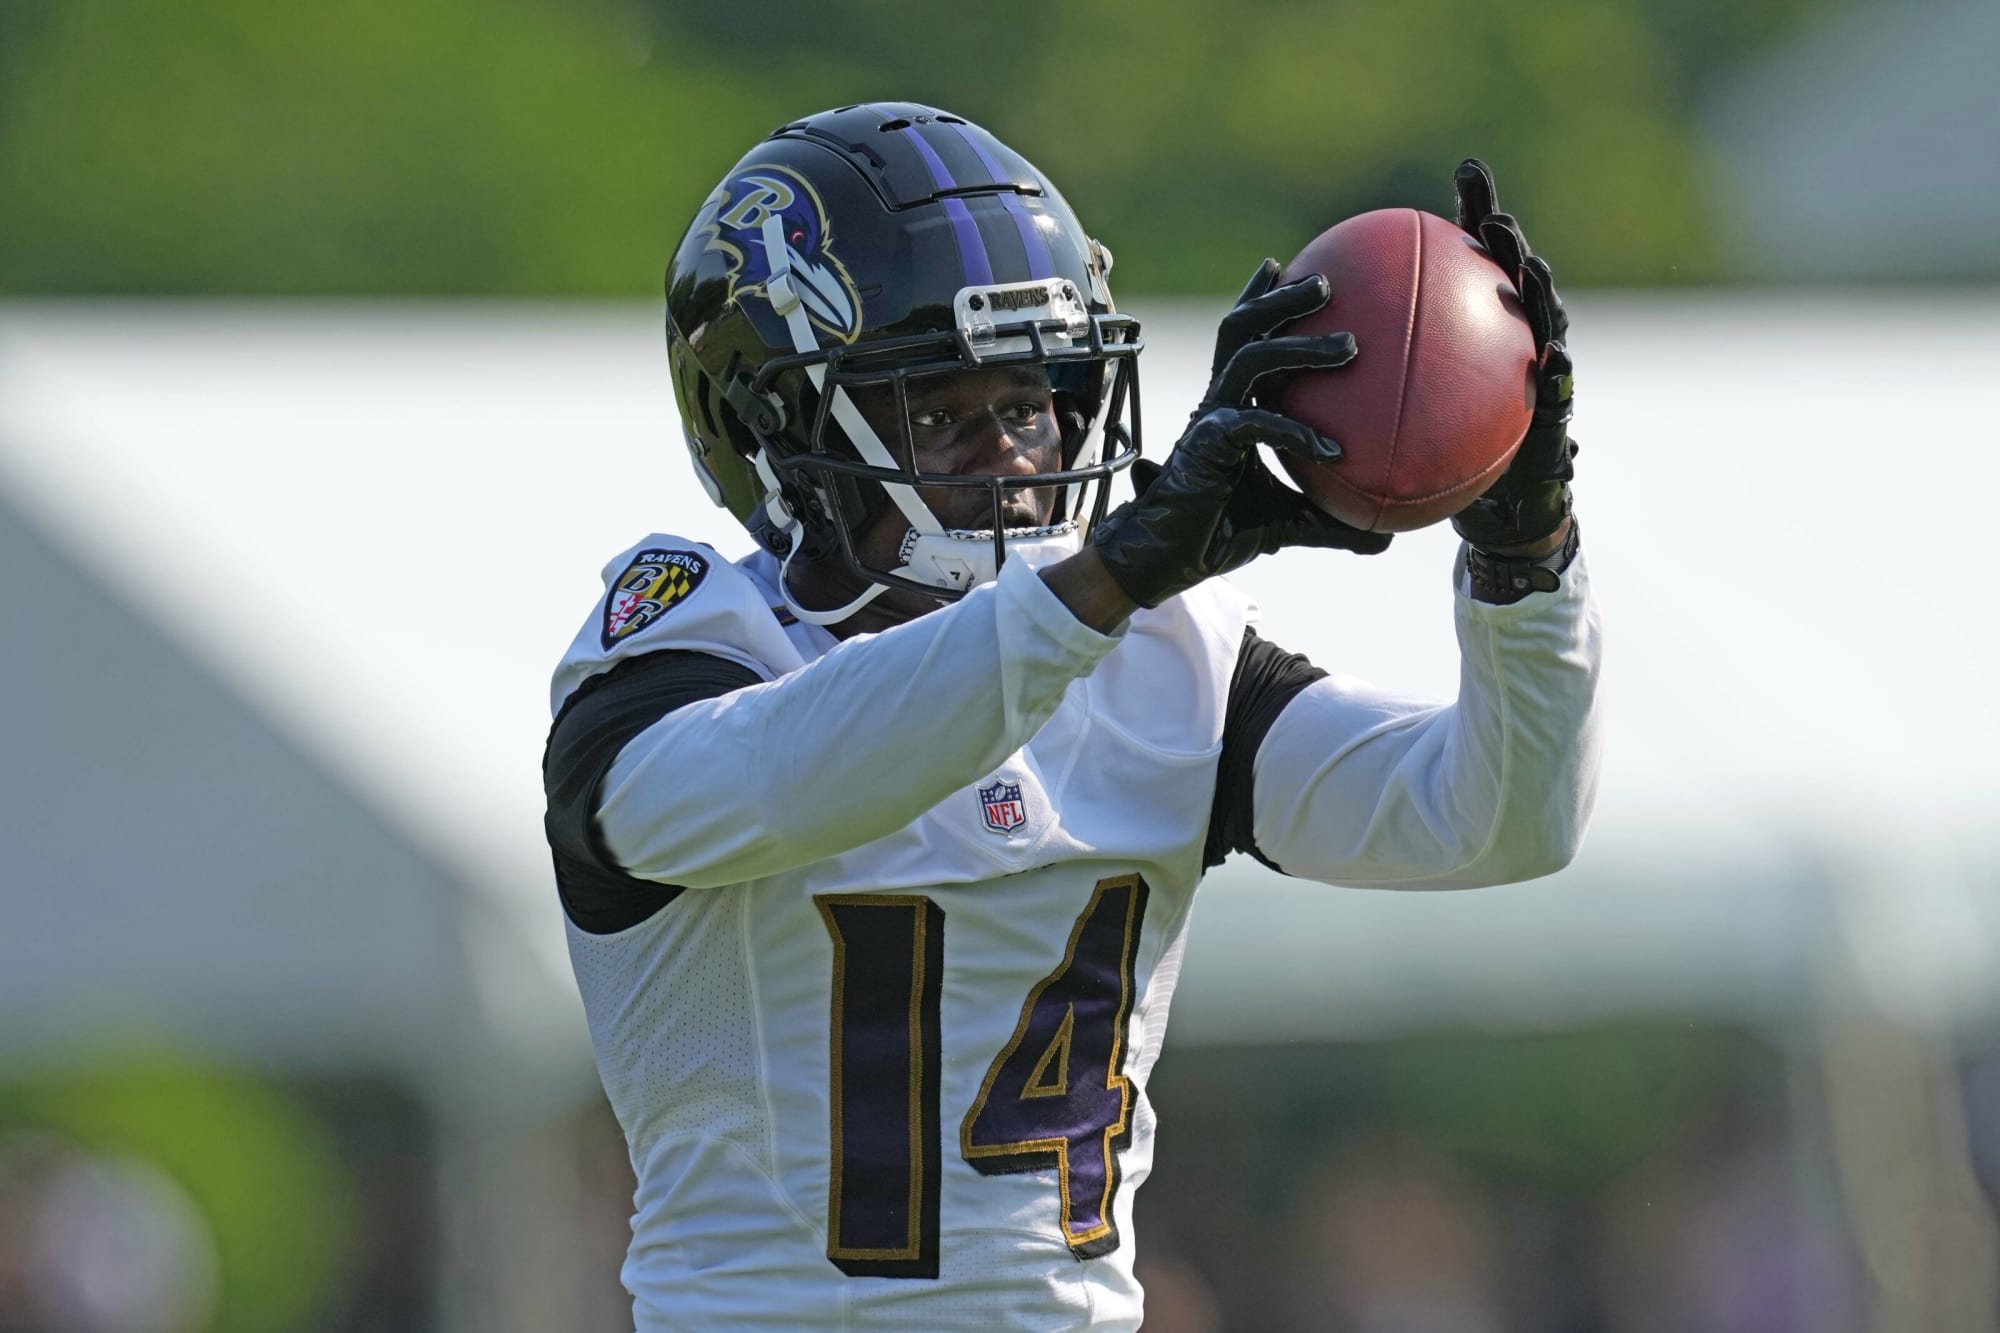 Sammy Watkins playing for the Ravens